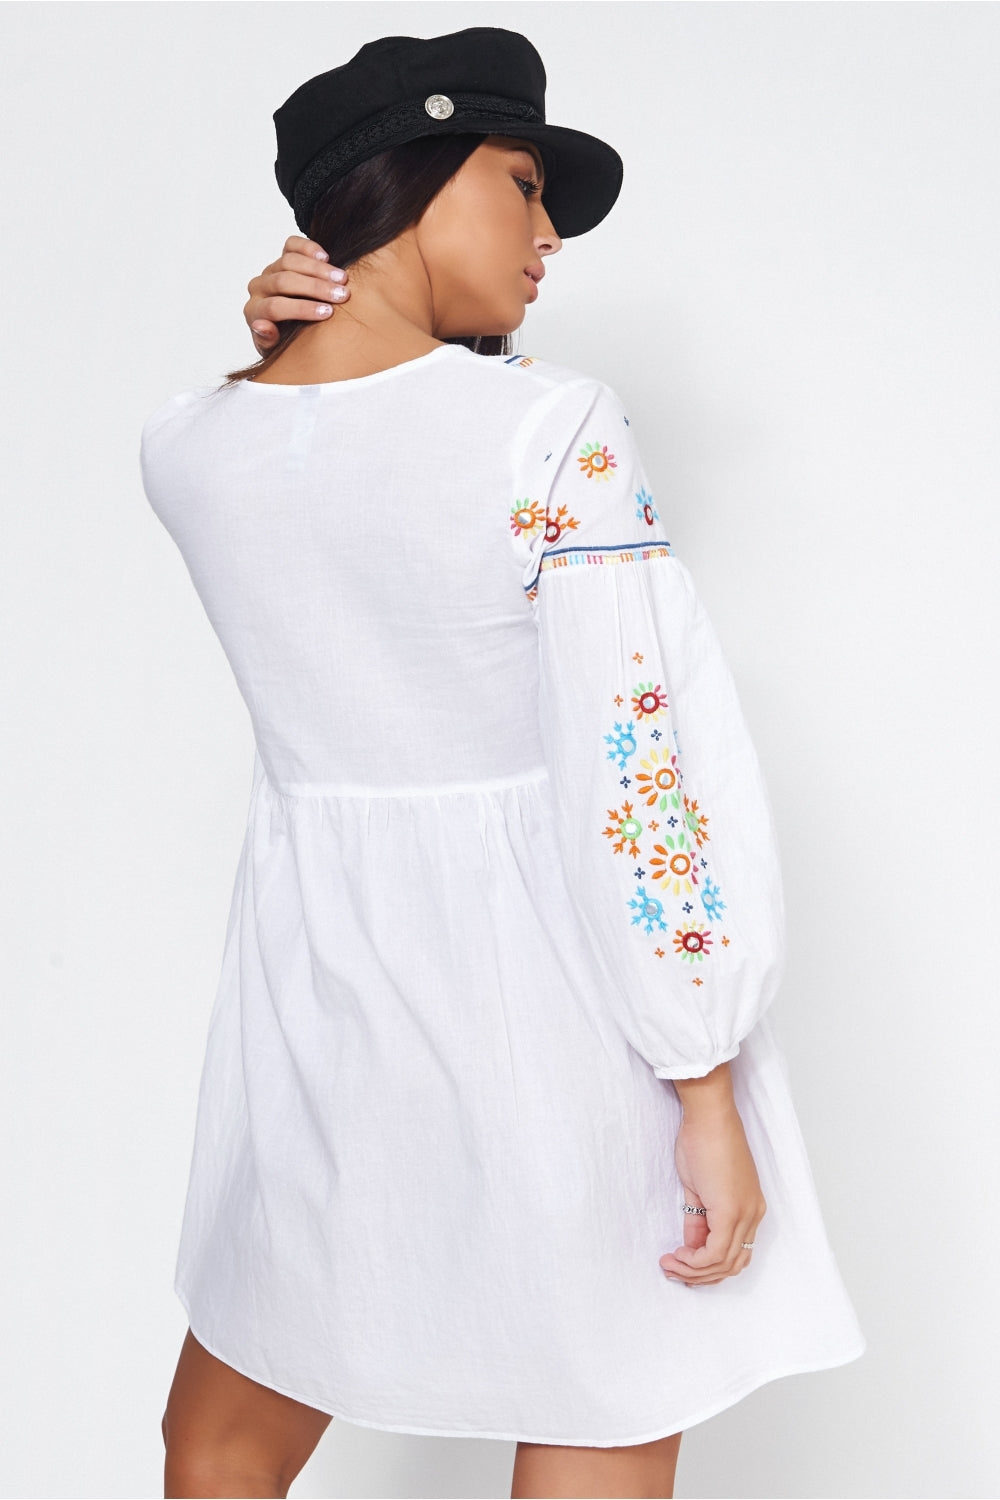 White Embroidered Beach Cover Up Dress